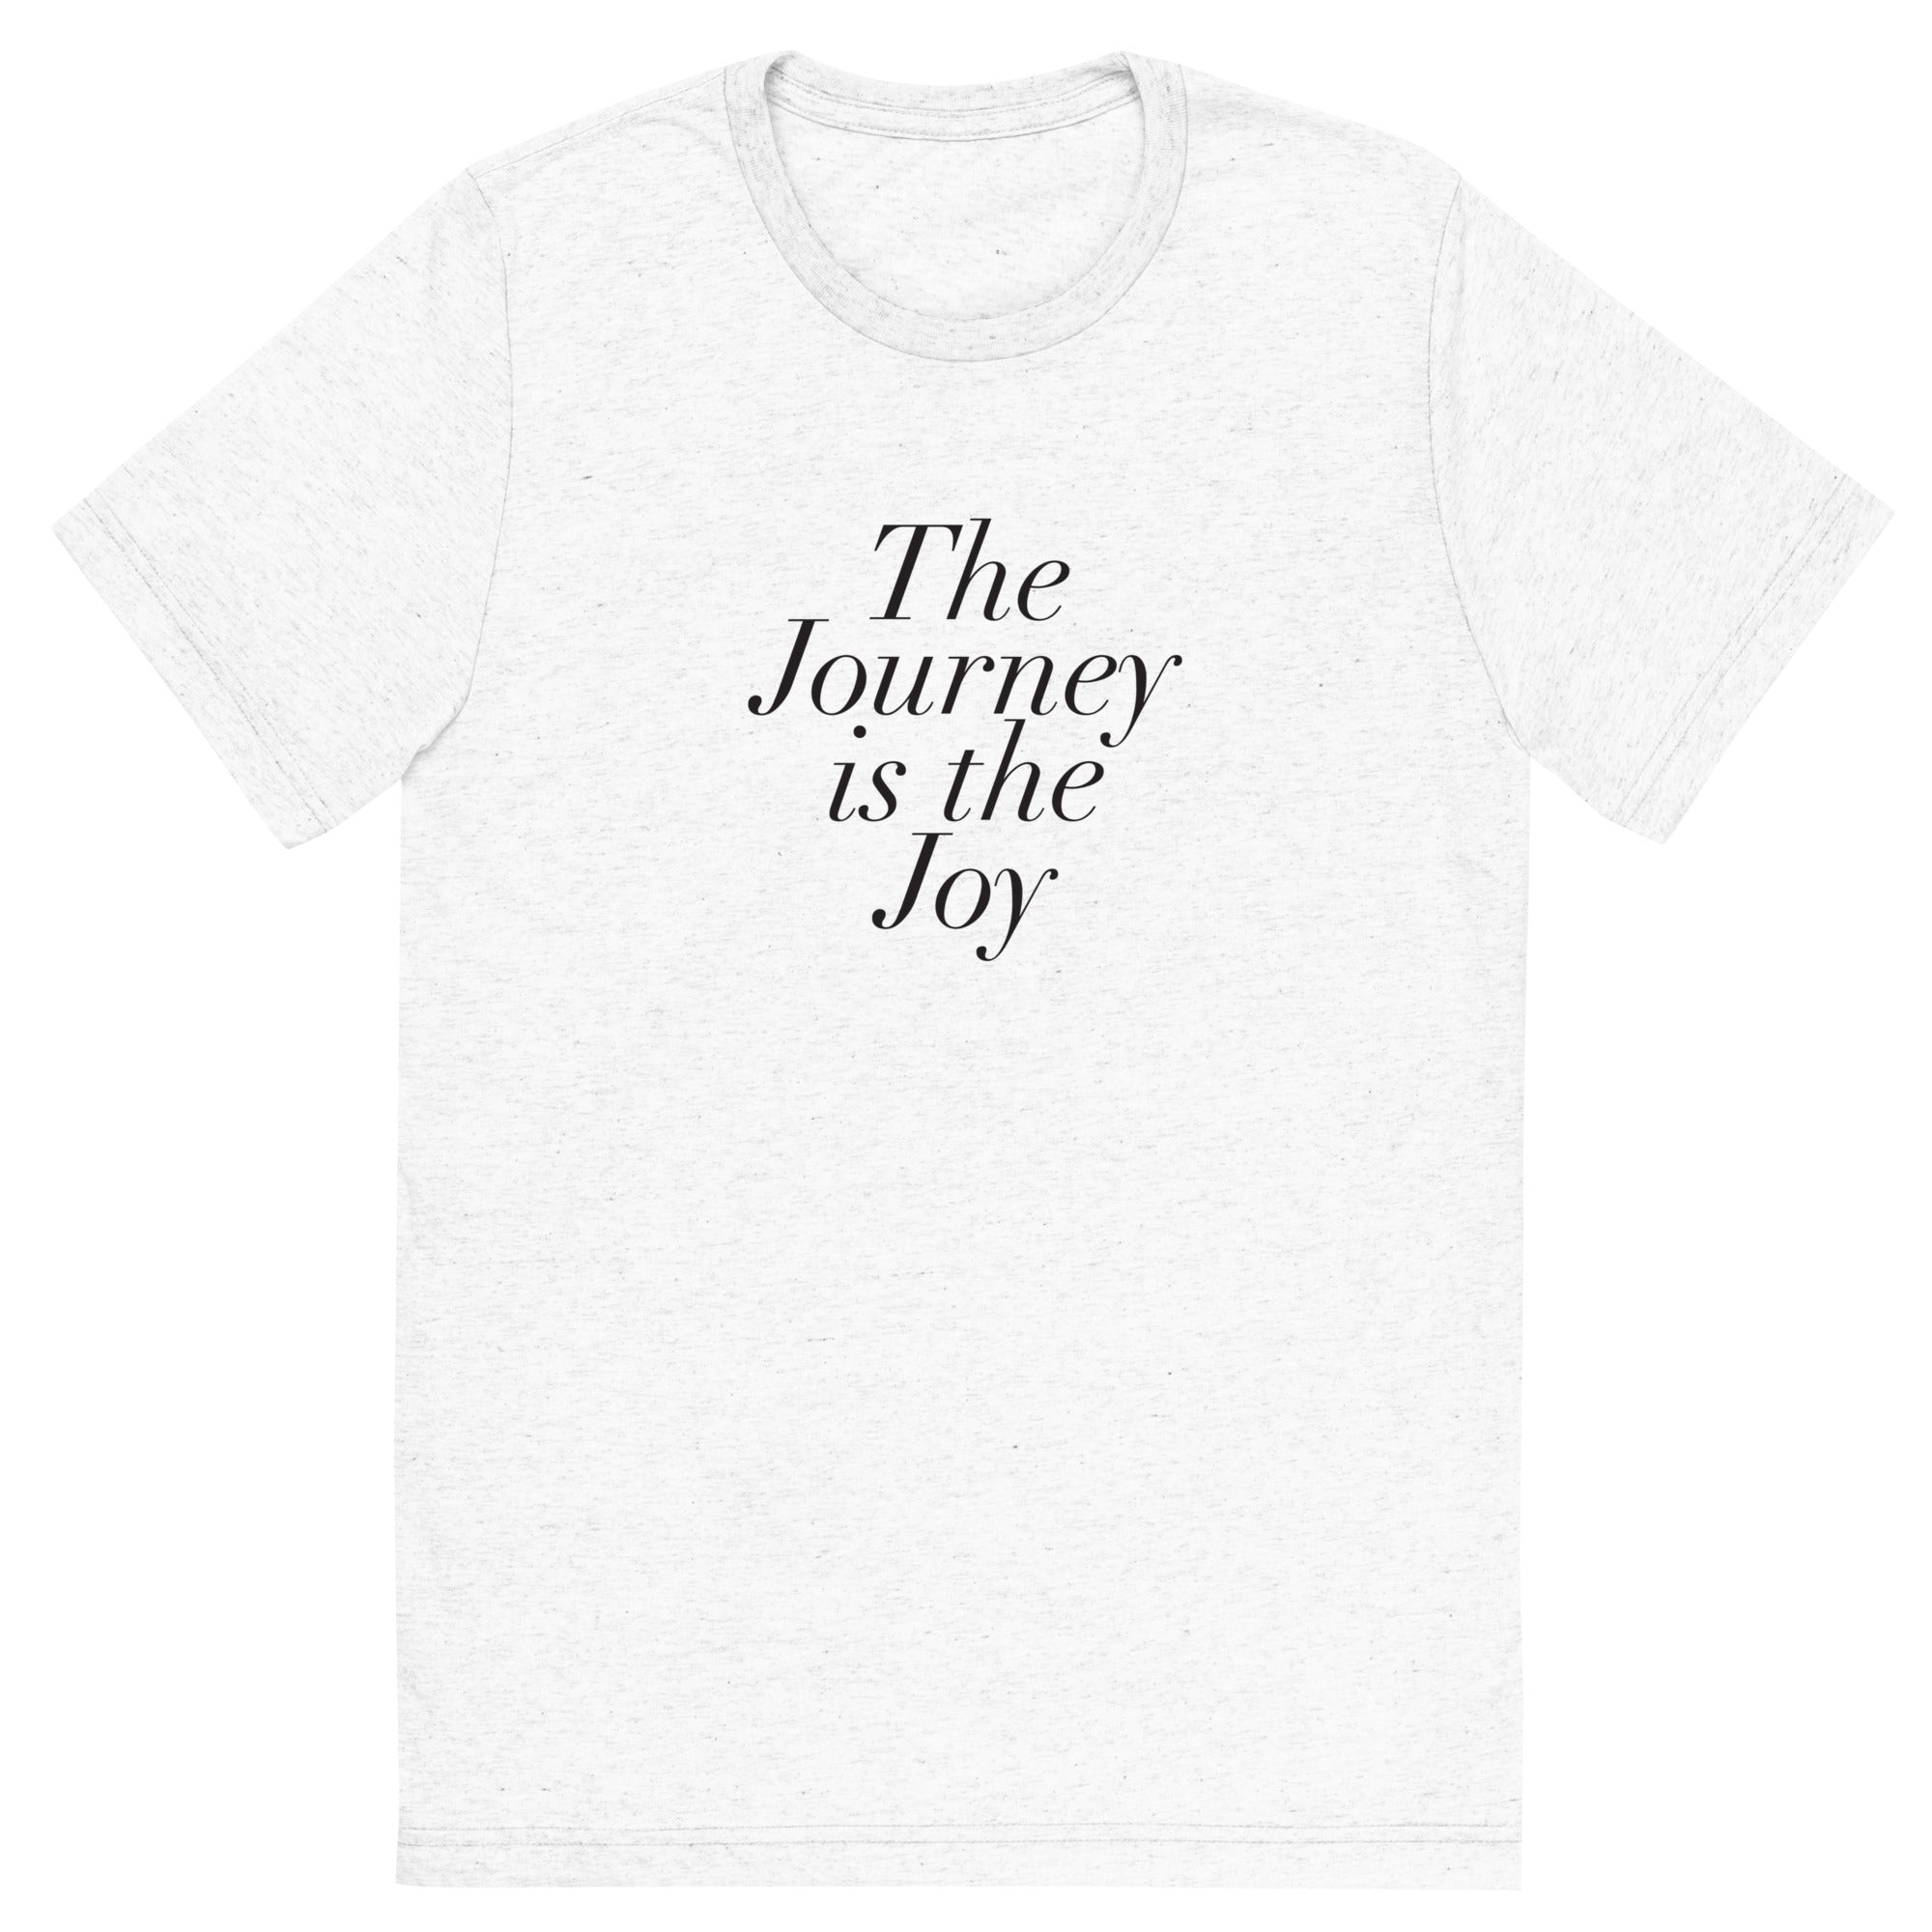 The Journey is the Joy - Unisex Short sleeve t-shirt in White Fleck and Pure White